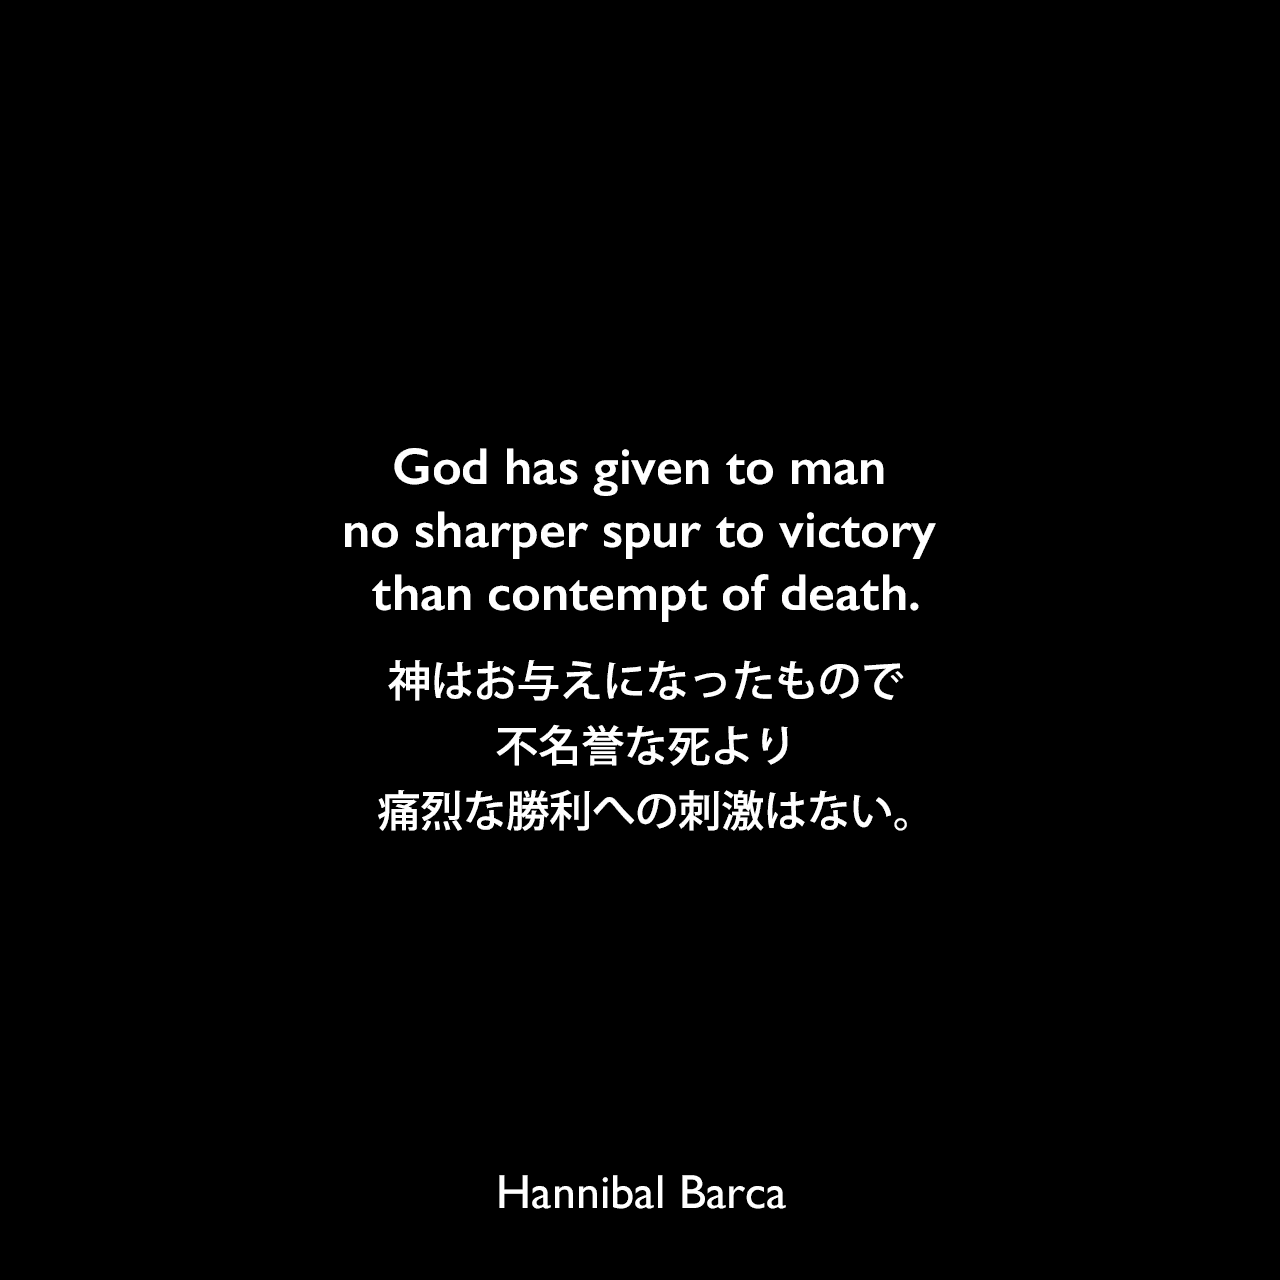 God has given to man no sharper spur to victory than contempt of death.神はお与えになったもので、不名誉な死より痛烈な勝利への刺激はない。Hannibal Barca